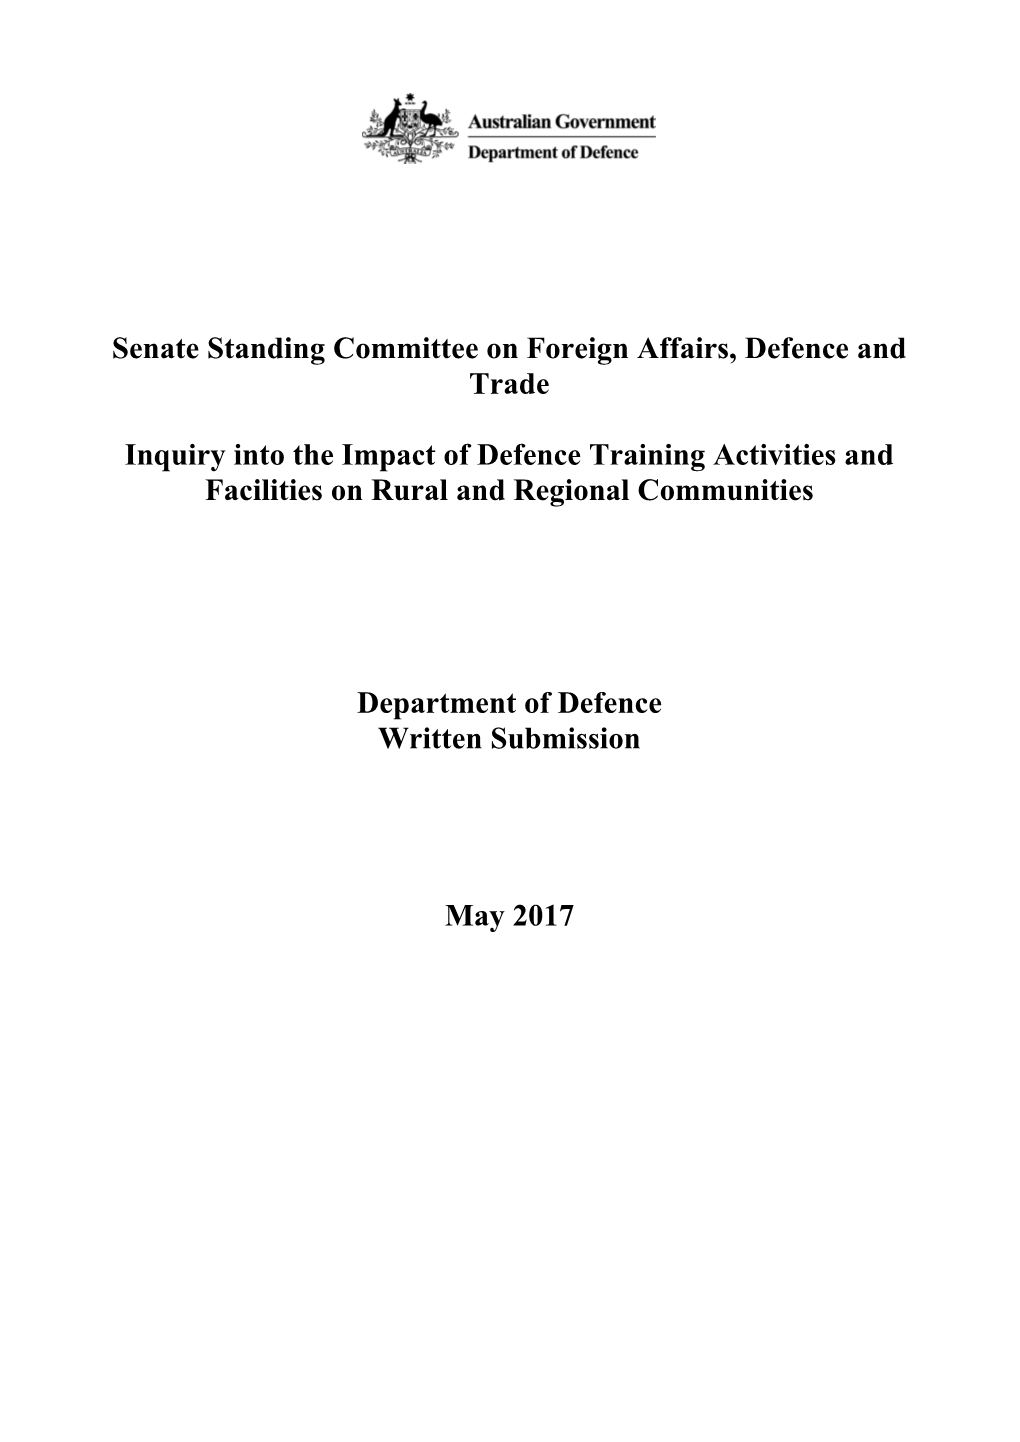 Senate Standing Committee on Foreign Affairs, Defence and Trade